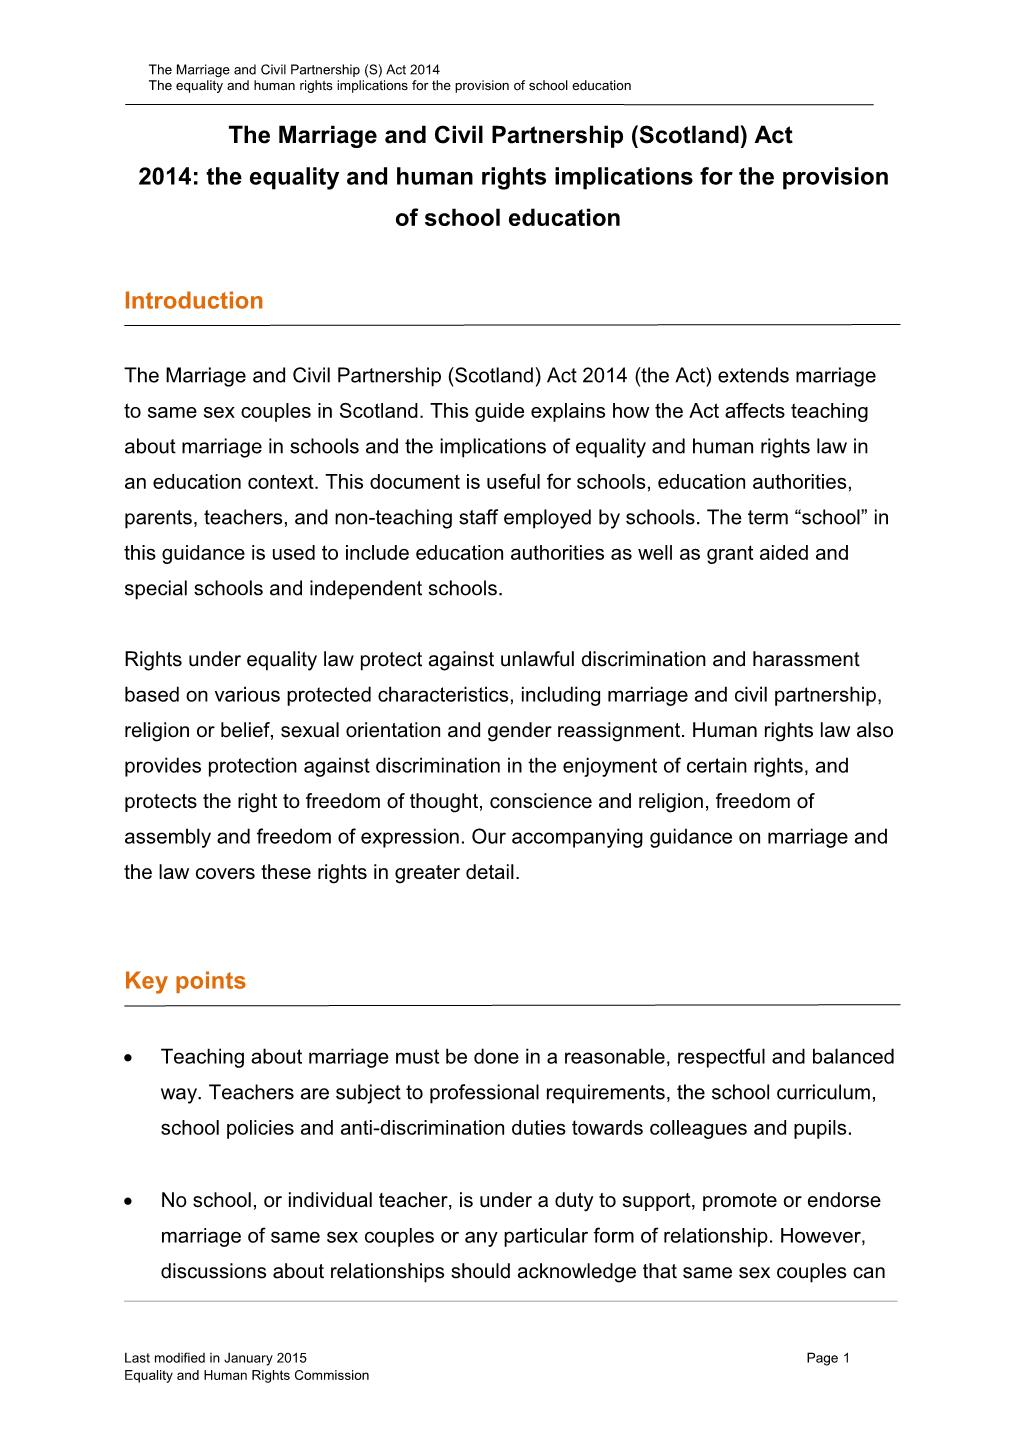 The Equality and Human Rights Implications for the Provision of School Education